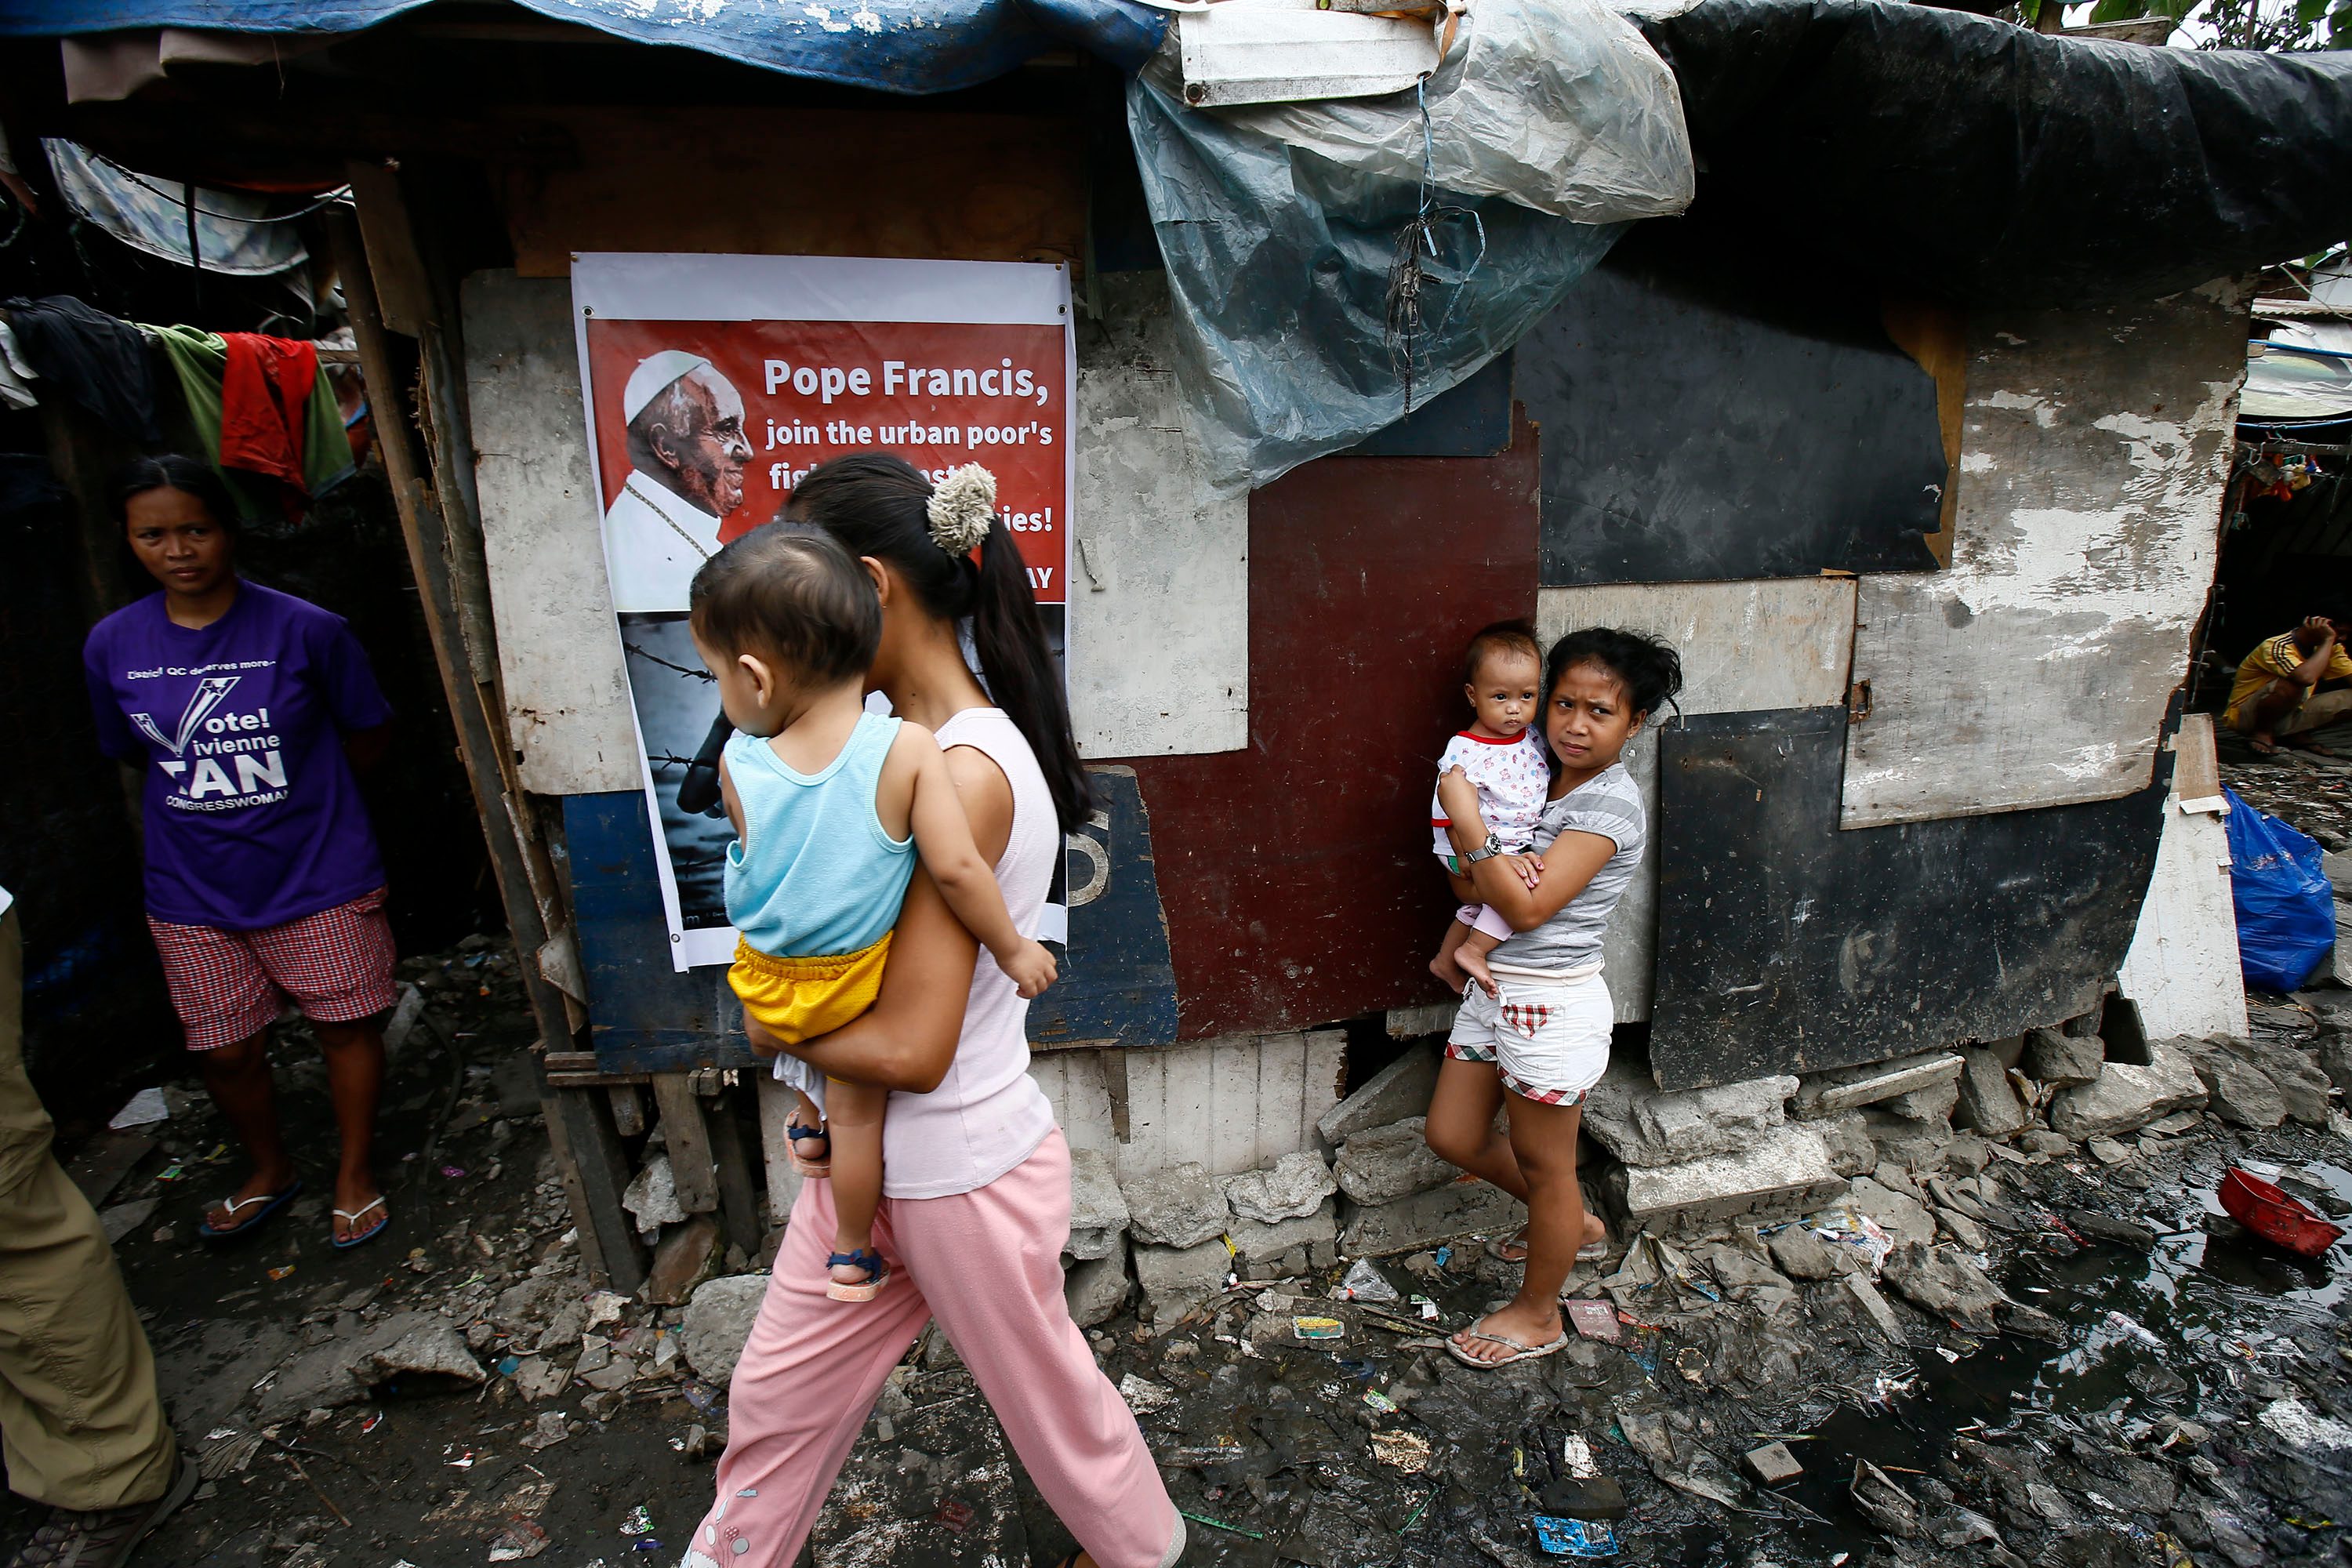 THE COUNTRY'S POOR. Filipino food scavengers walk past a portrait of Pope Francis at the Payatas dump site ahead of Pope Francis' visit in Quezon City, eastern Manila, Philippines, January 13, 2015. Photo by Dennis Sabangan/EPA 